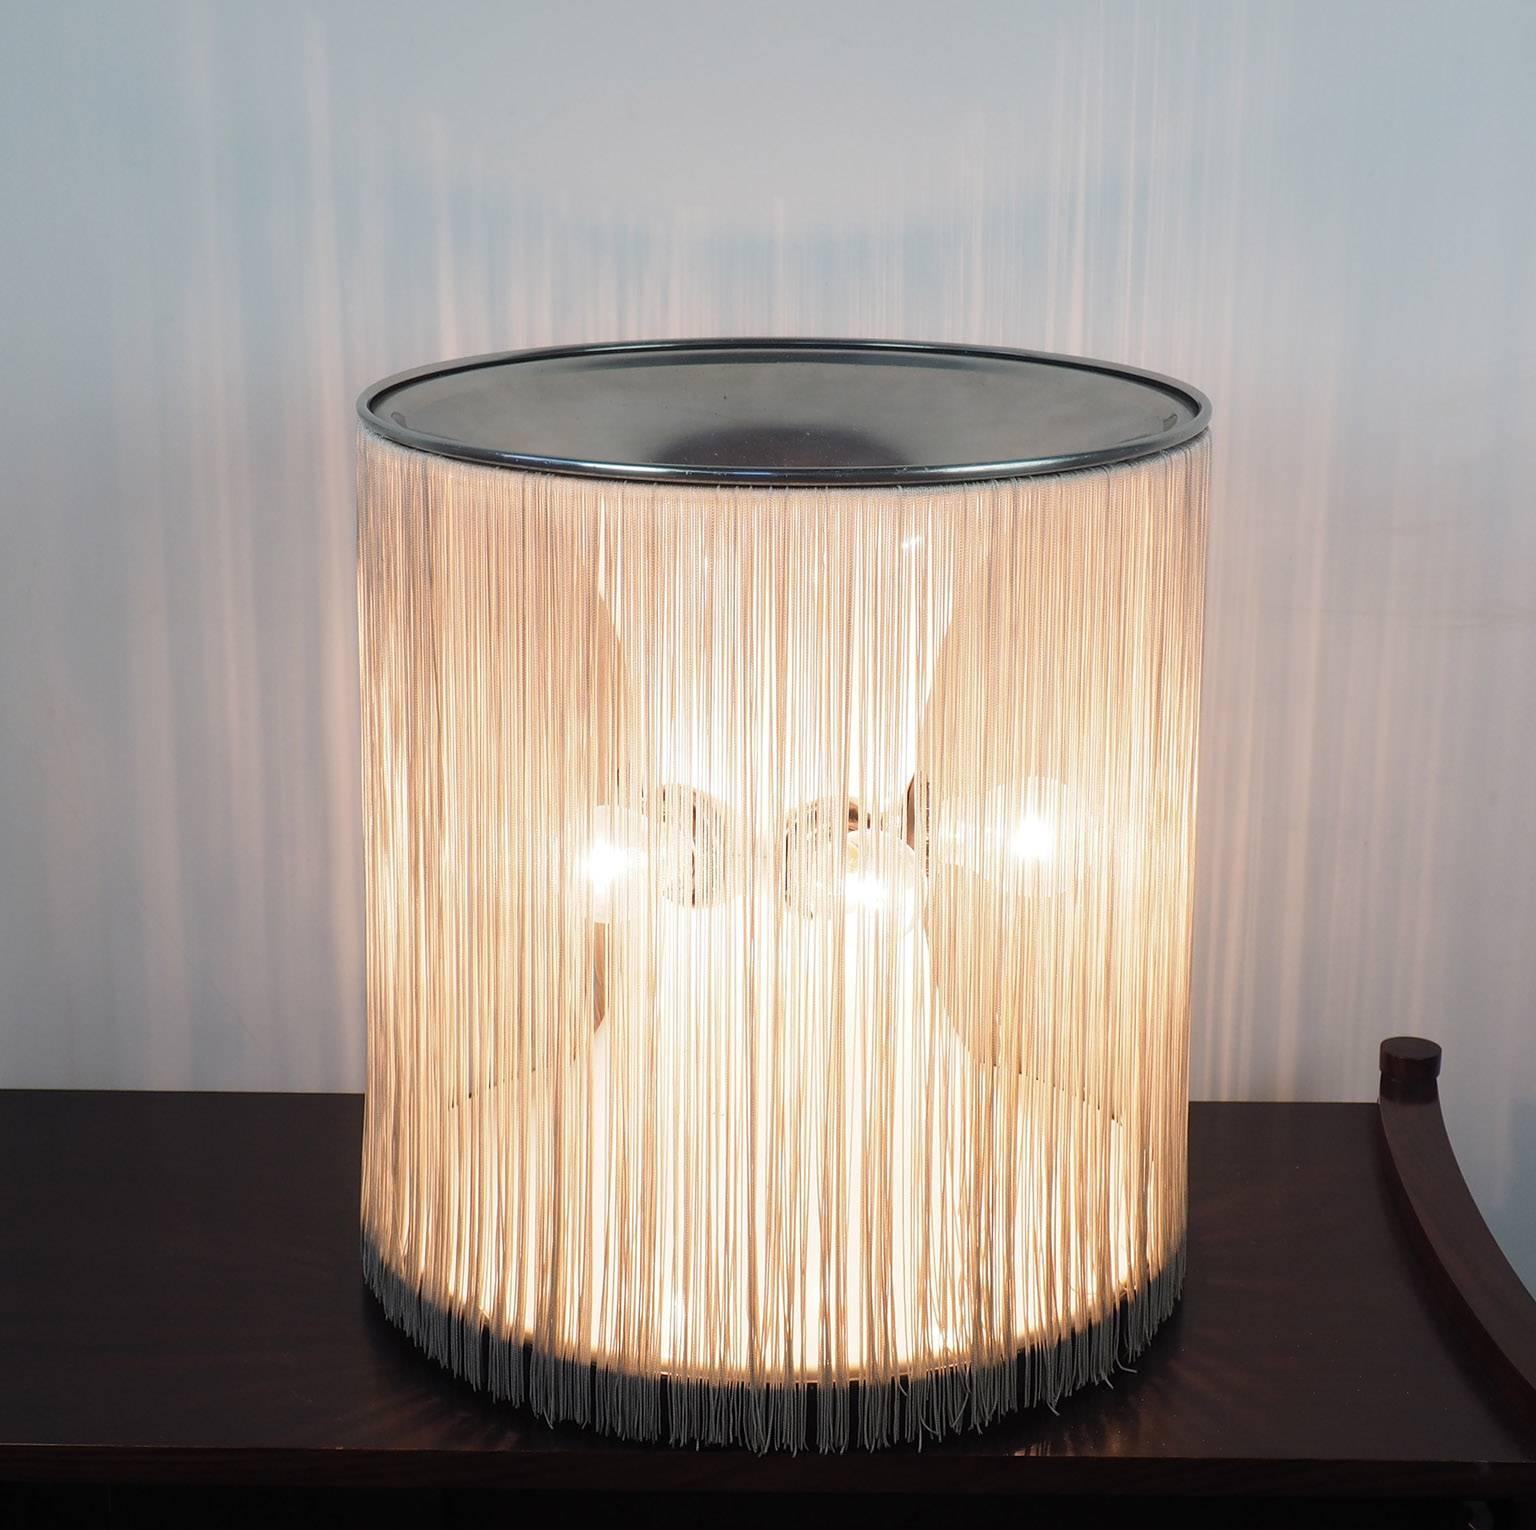 Thanks to the original silk fringe, the light becomes warm and cozy with this beautiful table lamp designed By Gianfranco Frattini in 1961 for Arteluce in Milano and produced until 1970s . Made of aluminium, (as the top that is polished aluminum as